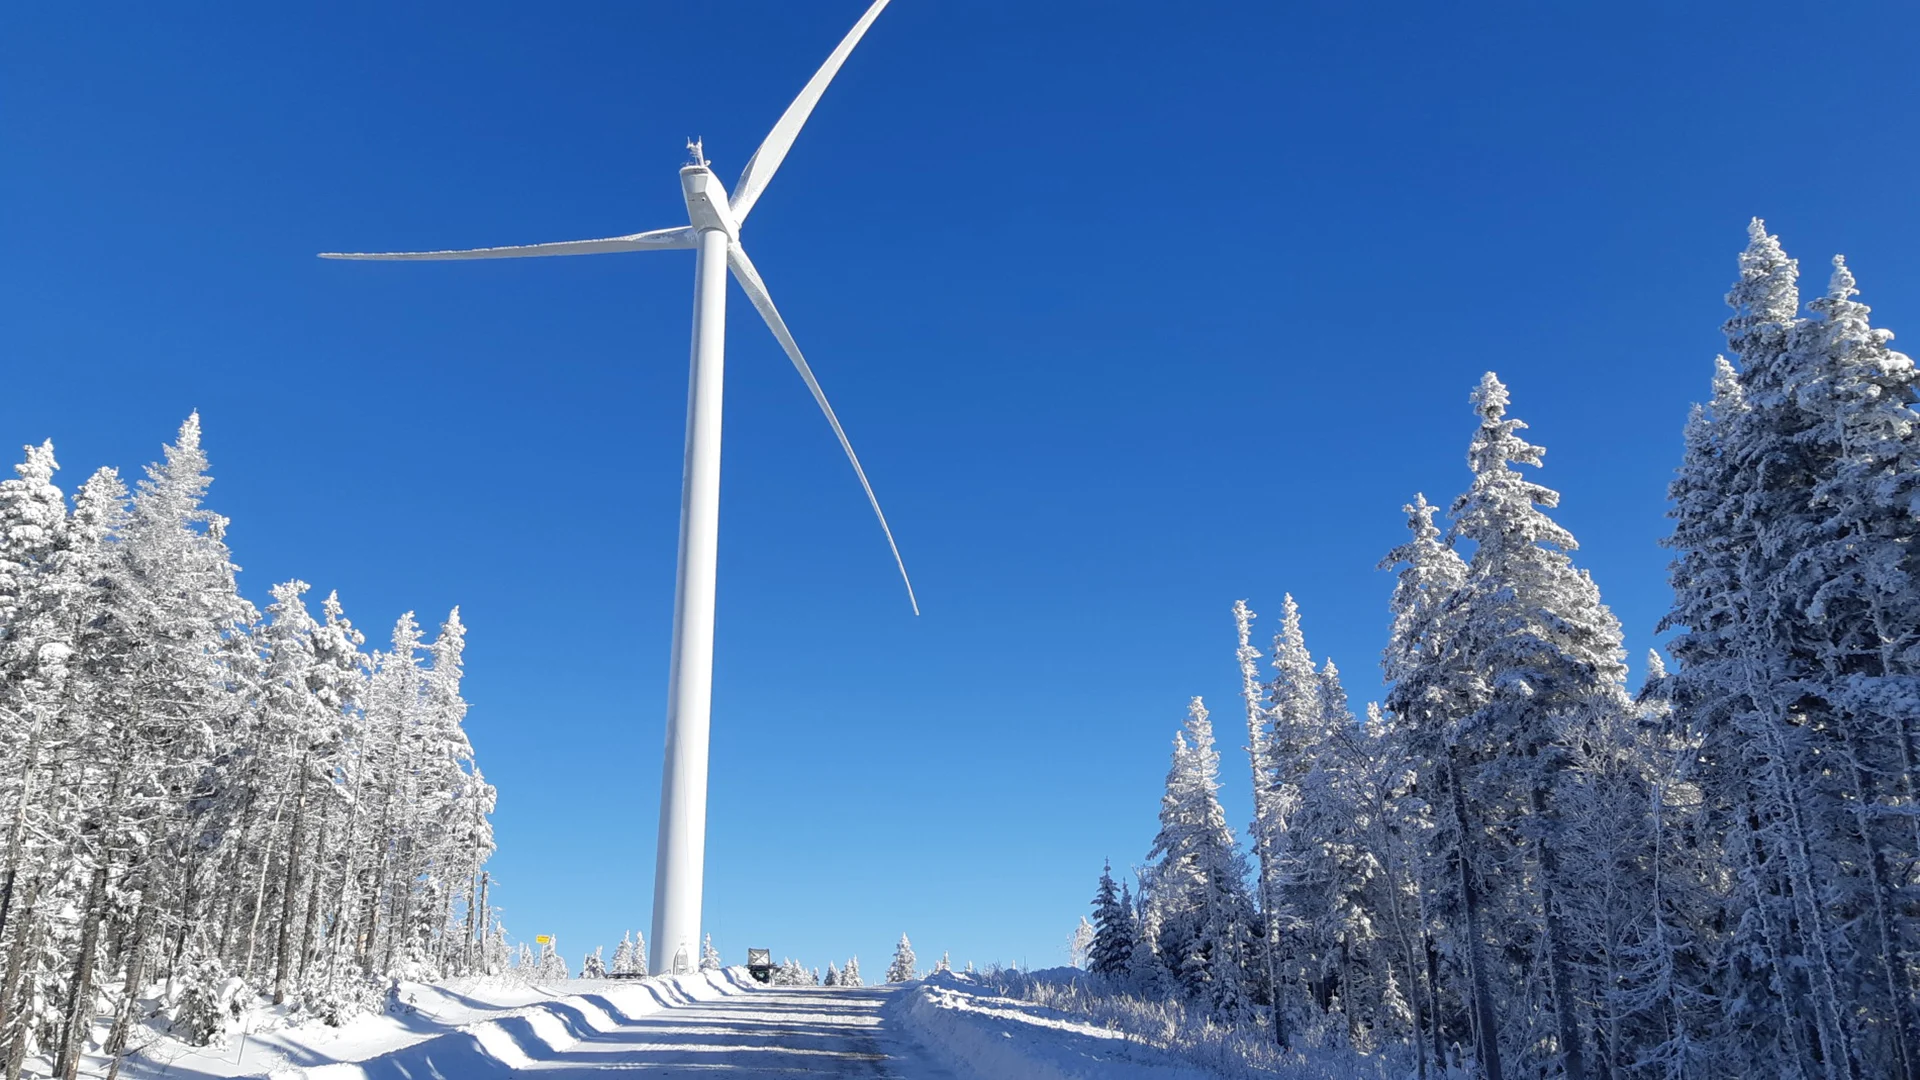 Ice can be a problem for wind turbines. Here's a Canadian company's solution